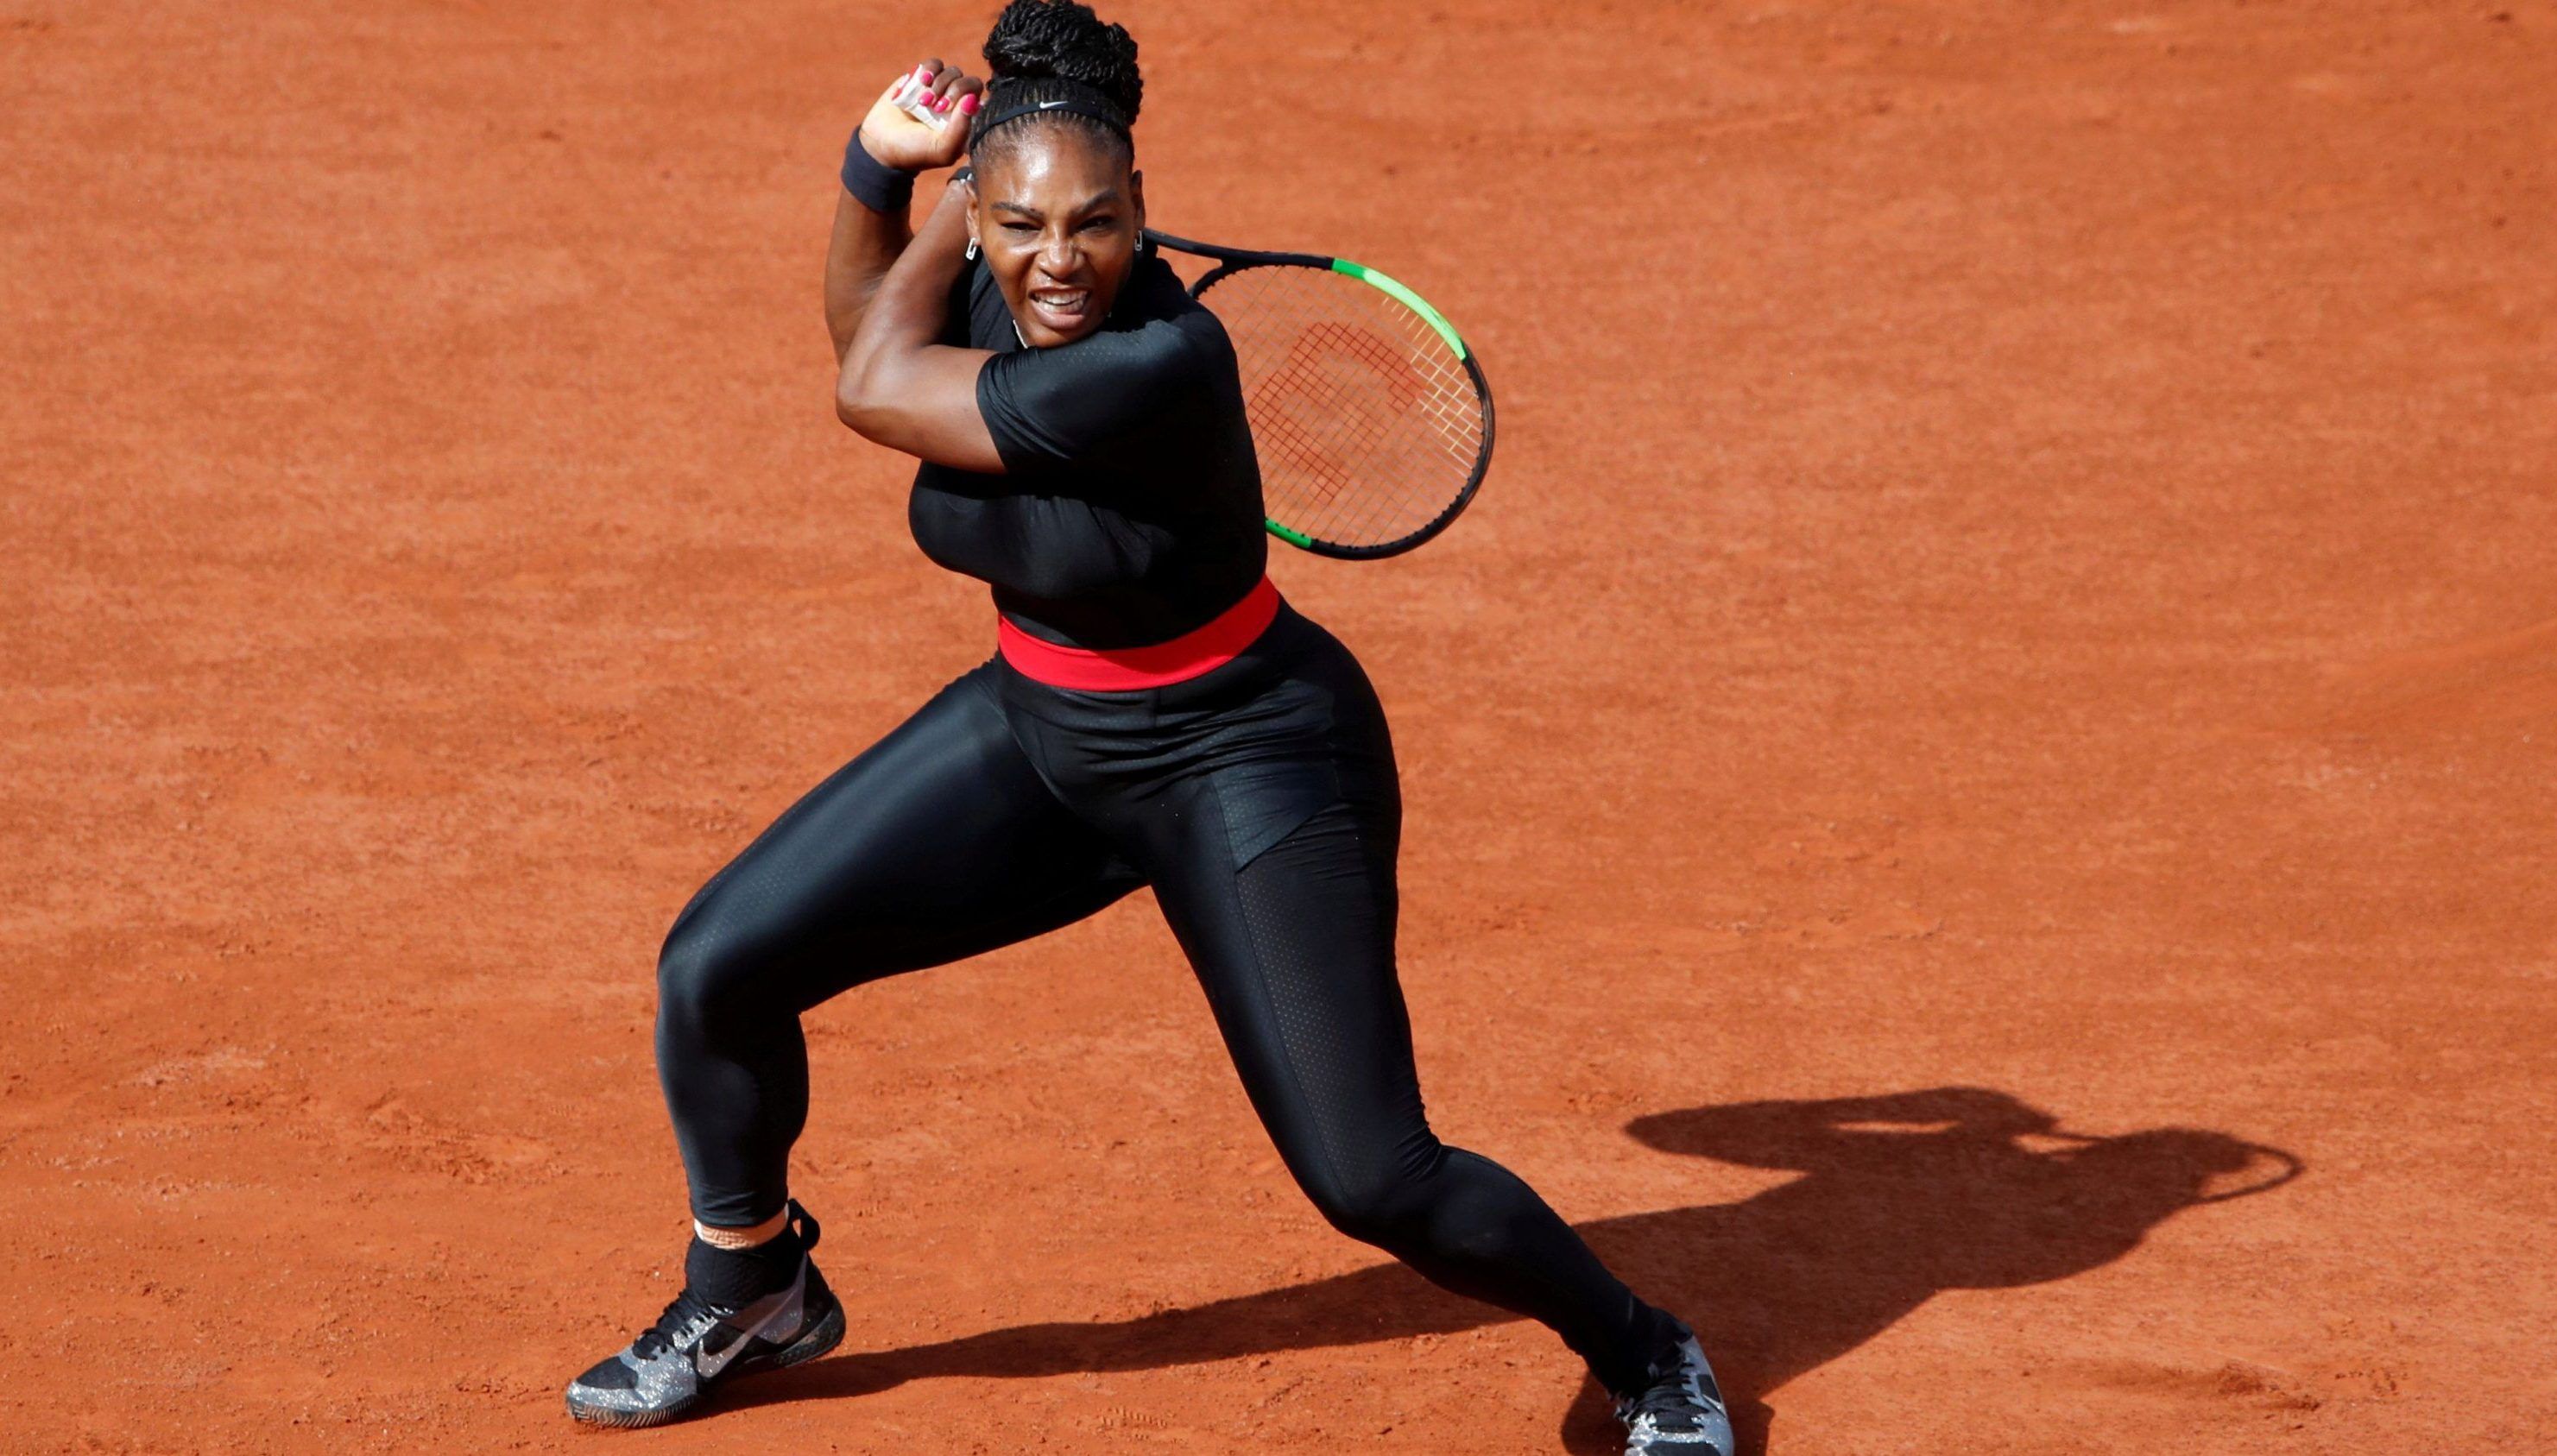 Serena Williams’ catsuit prompted the French Open to change its dress code.